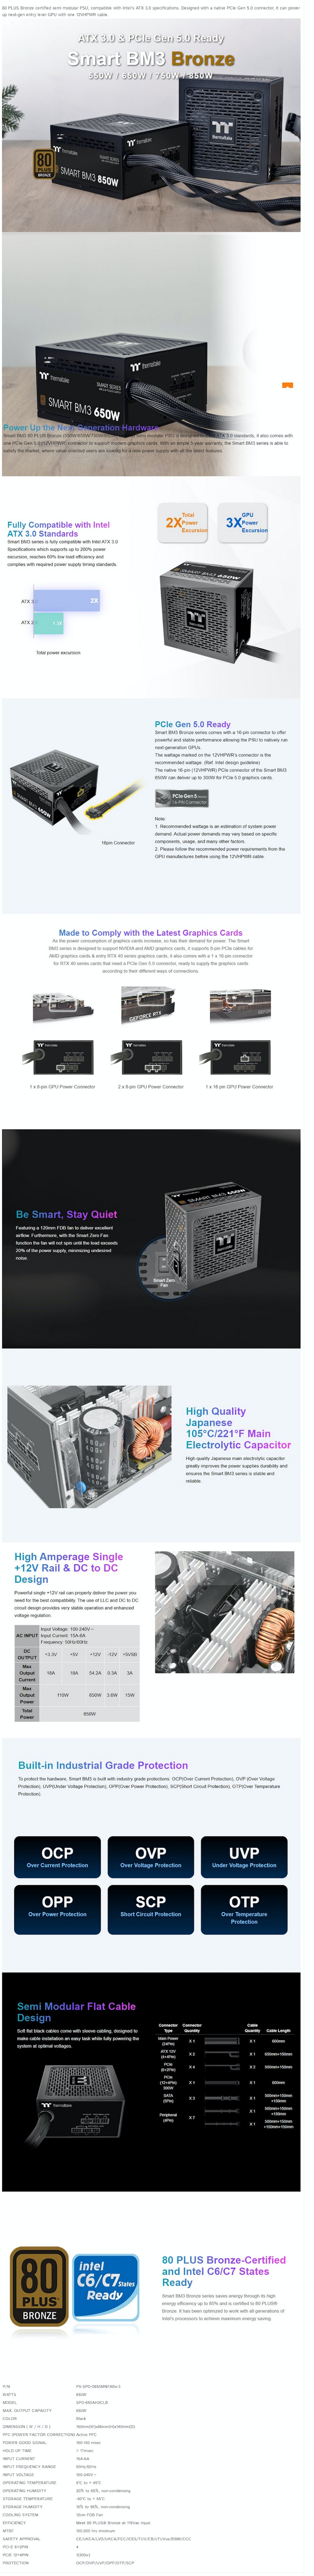 A large marketing image providing additional information about the product Thermaltake Smart BM3 - 850W 80PLUS Bronze PCIe 5.0 ATX Semi-Modular PSU - Additional alt info not provided